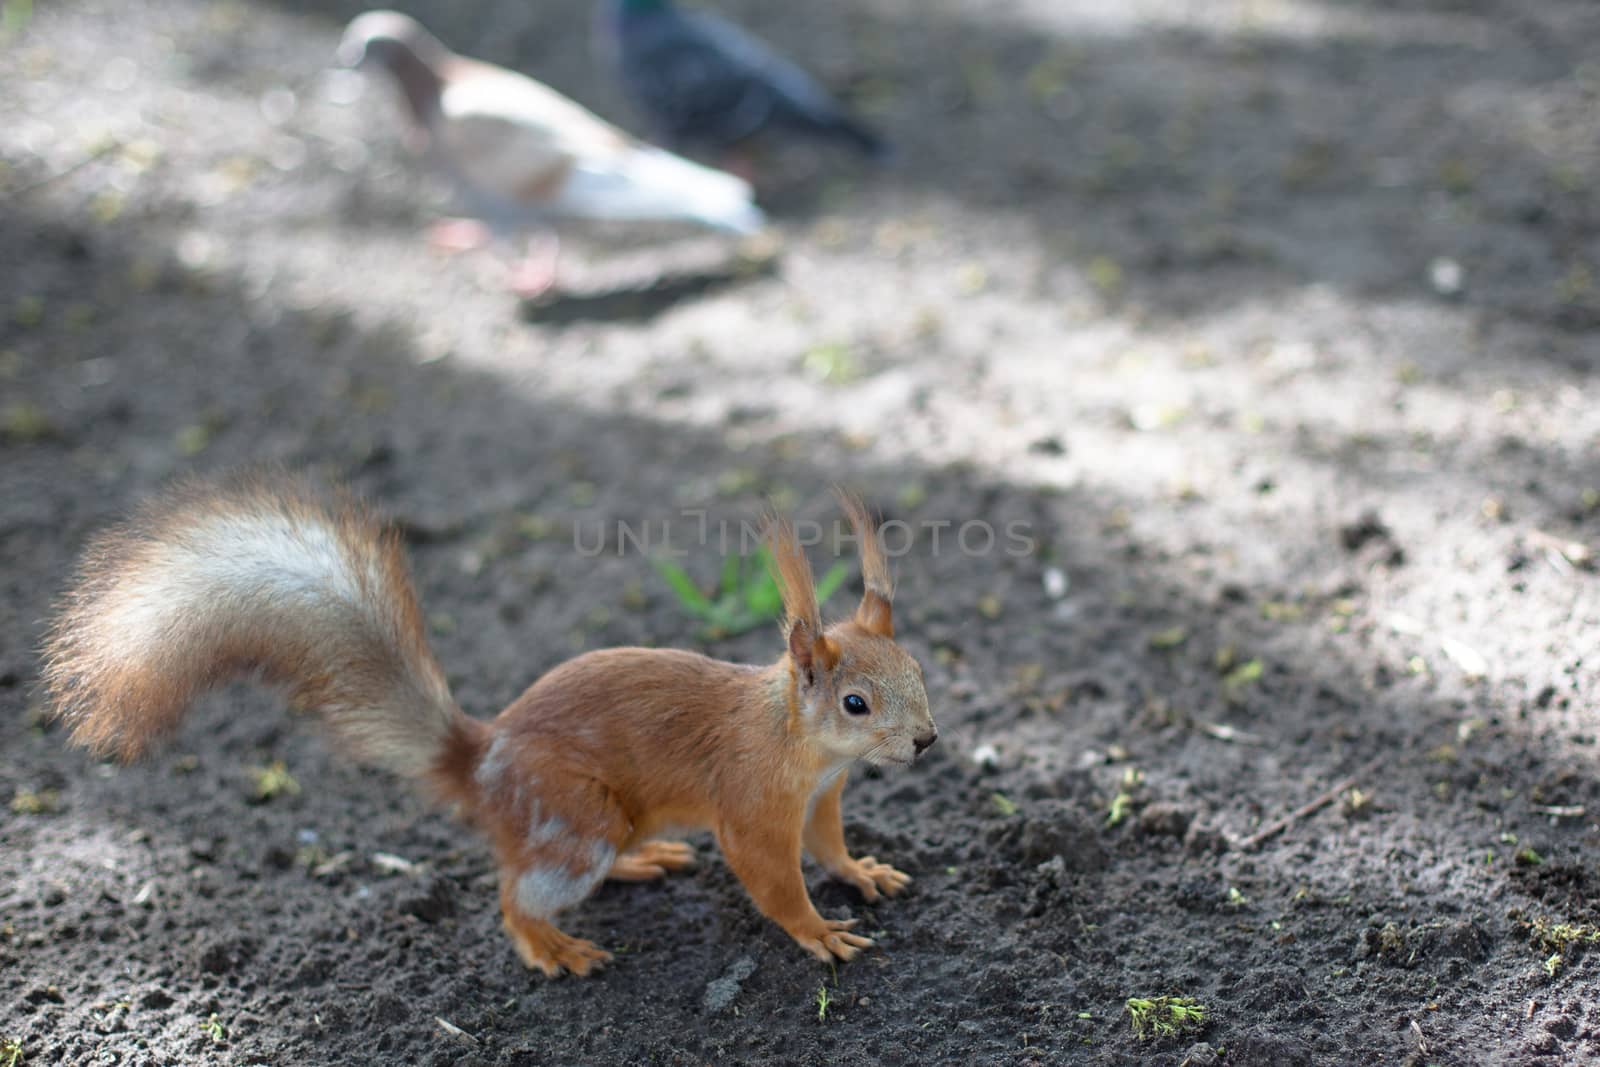 Small red squirrel on a ground before birds
